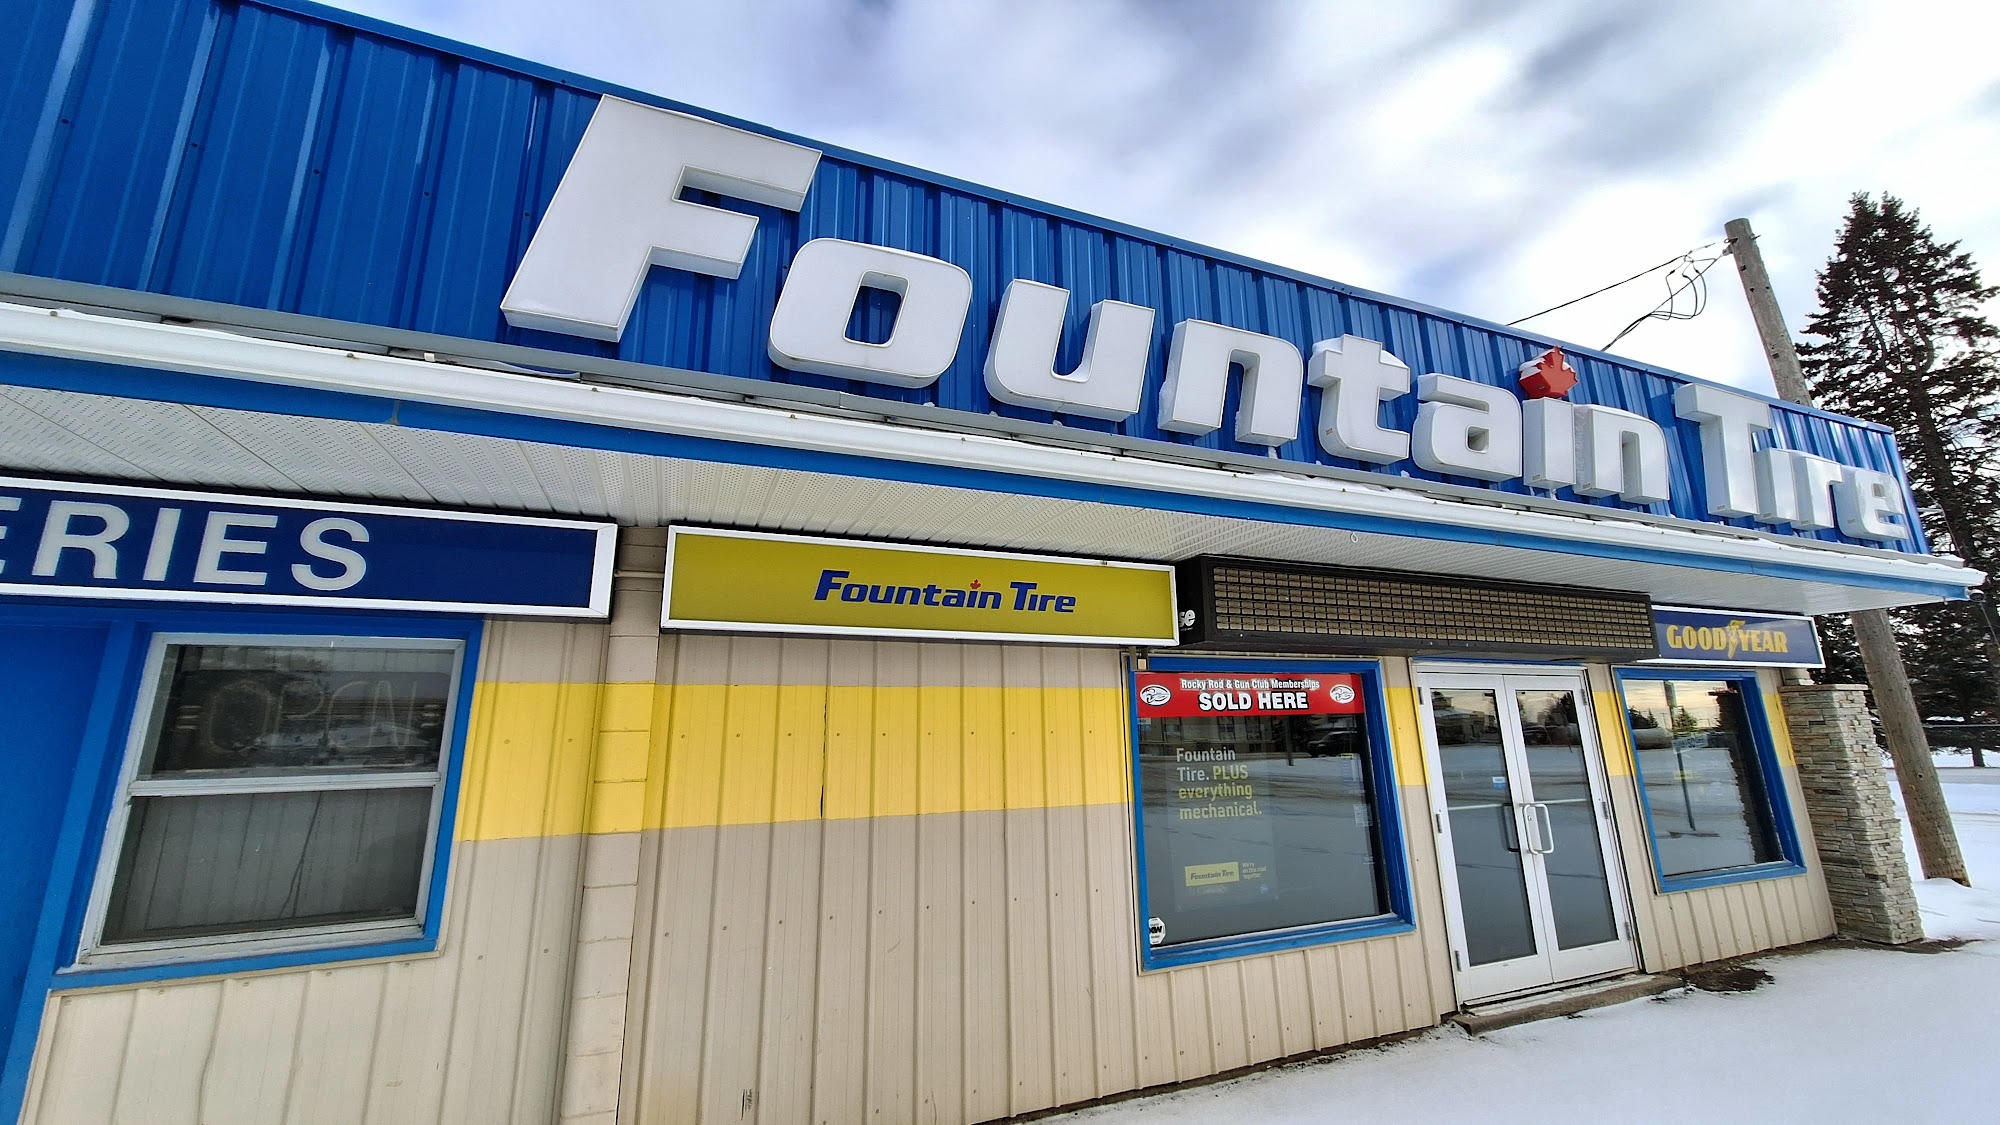 Fountain Tire 5003 45 St, Rocky Mountain House Alberta T4T 1A3